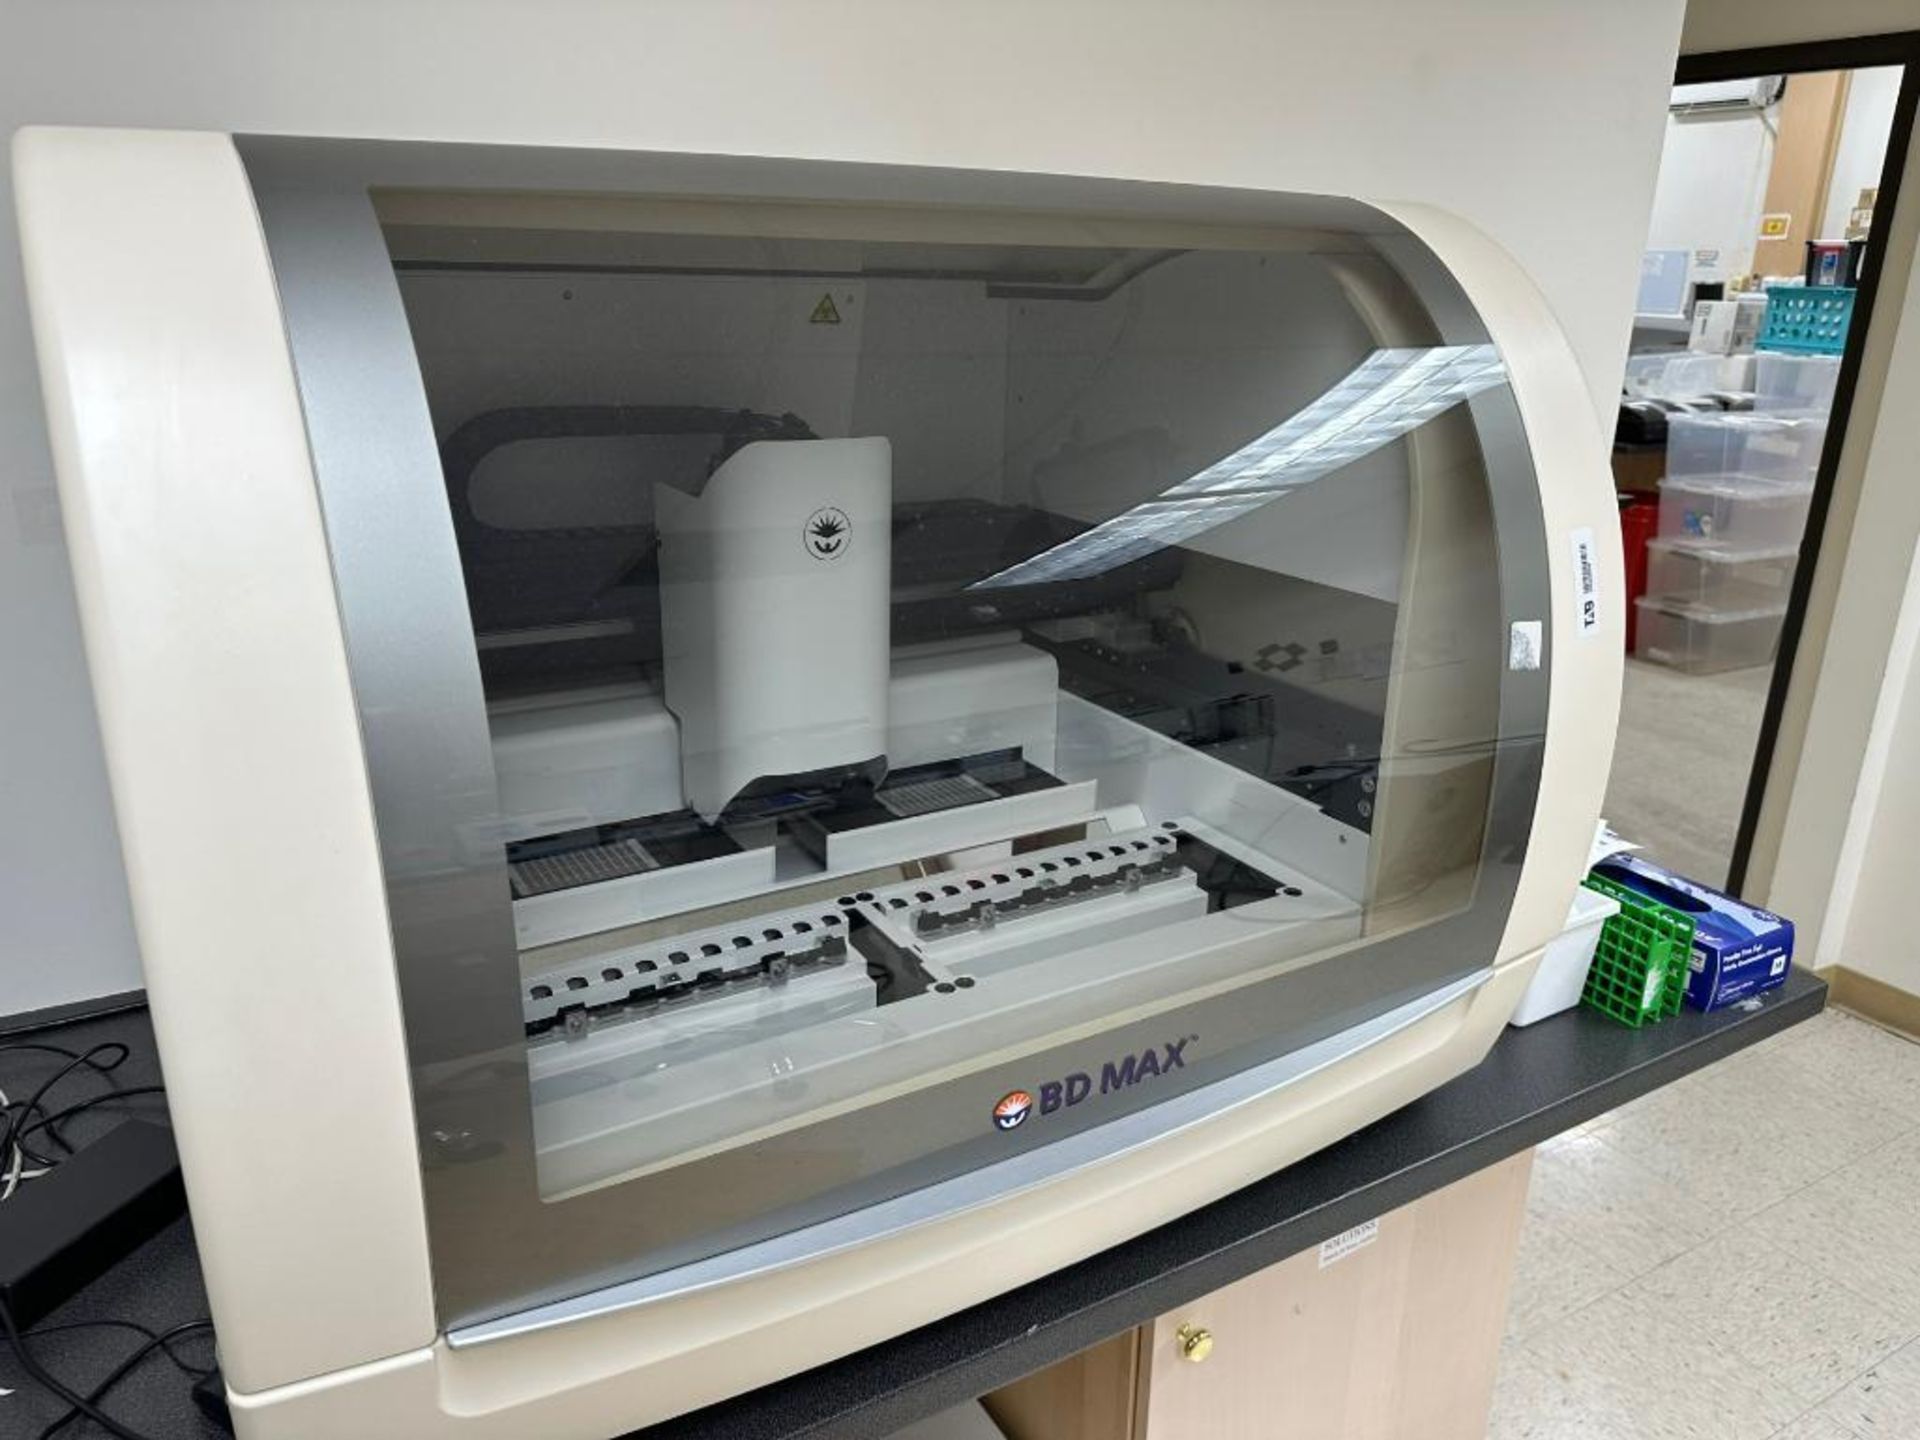 BD MAX MOLECULAR DIAGNOSTIC TESTING SYSTEM; REAL TIME PCR TESTING - Image 2 of 4